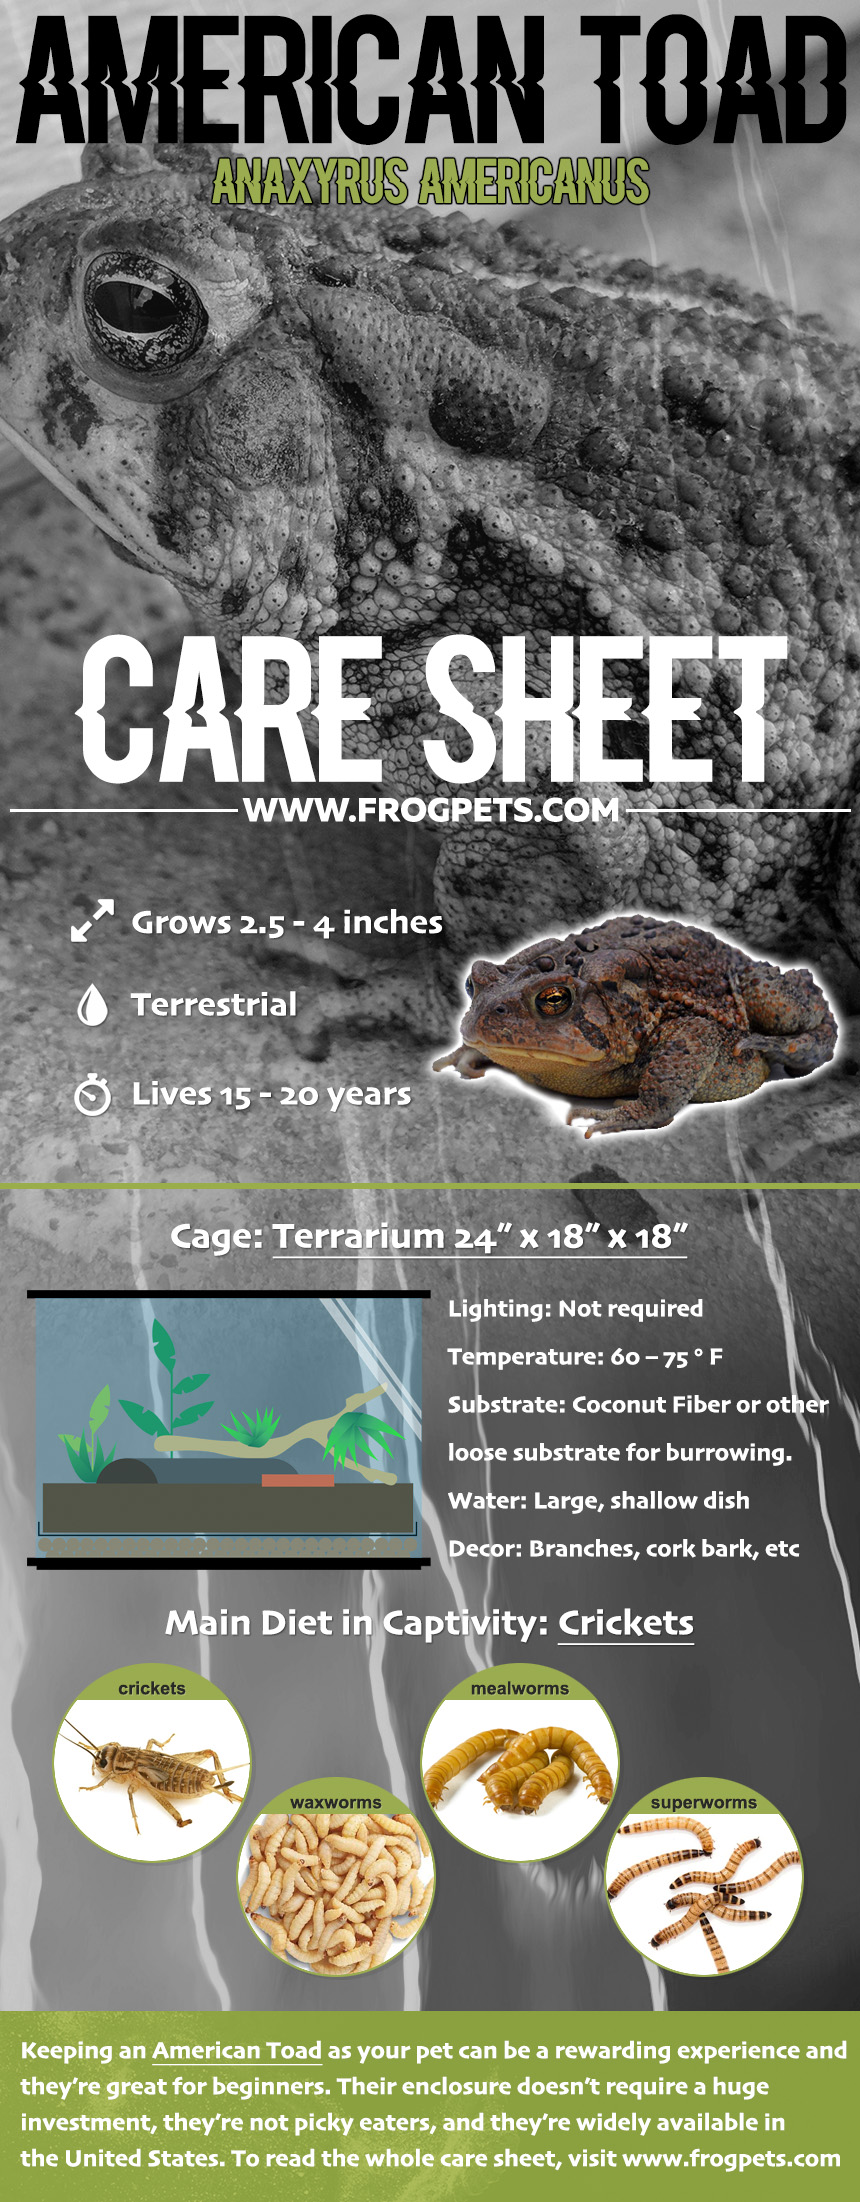 American Toad Infographic